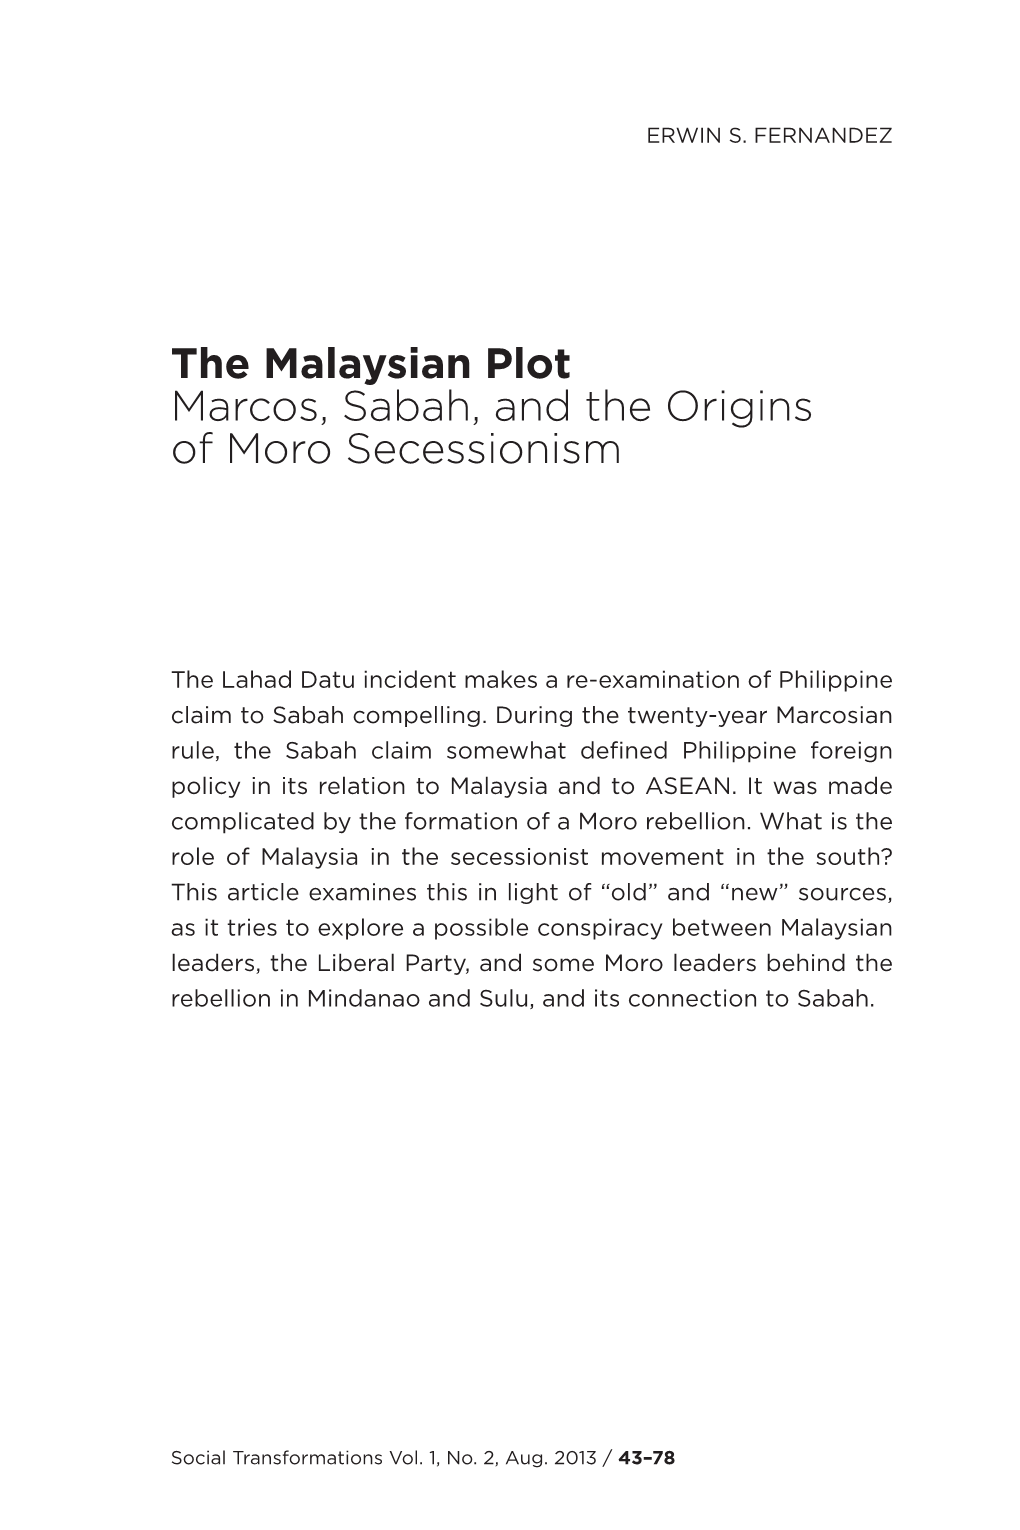 The Malaysian Plot Marcos, Sabah, and the Origins of Moro Secessionism